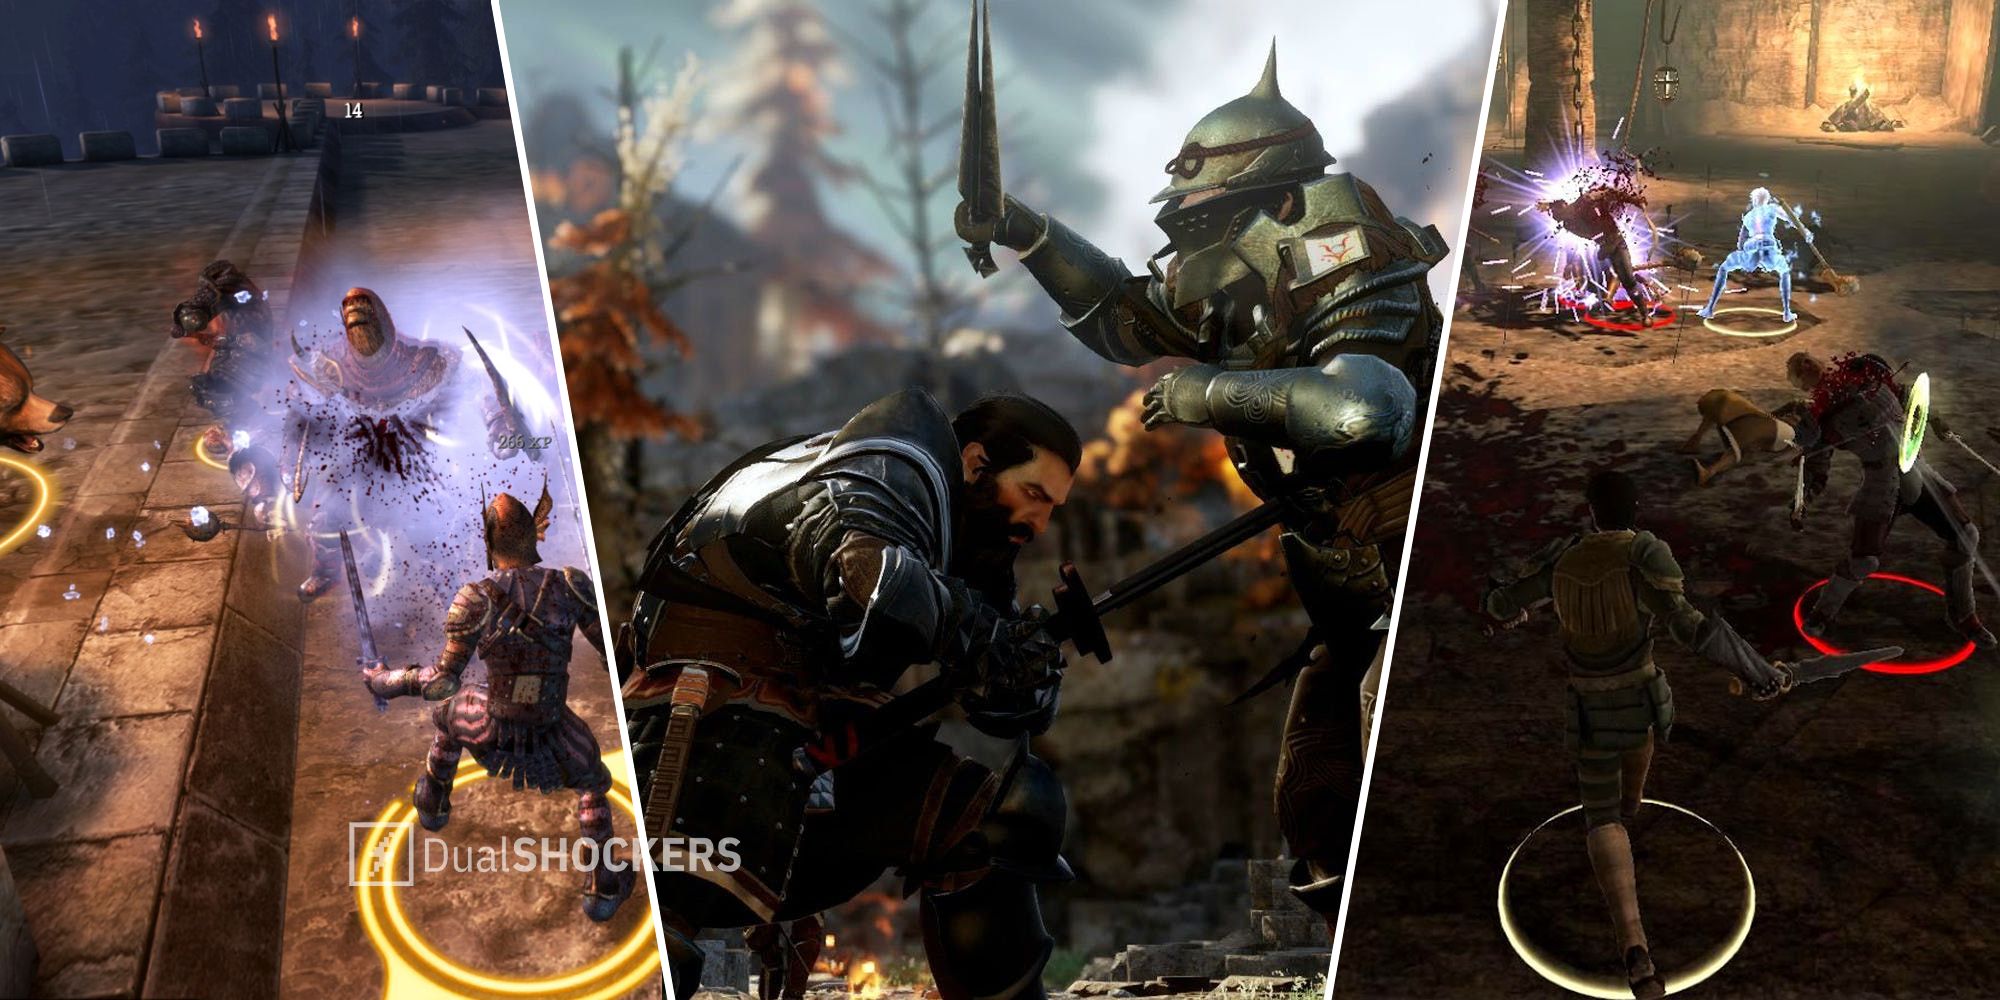 Dragon Age Origins, Dragon Age 2, and Dragon Age Inquisition combat gameplay